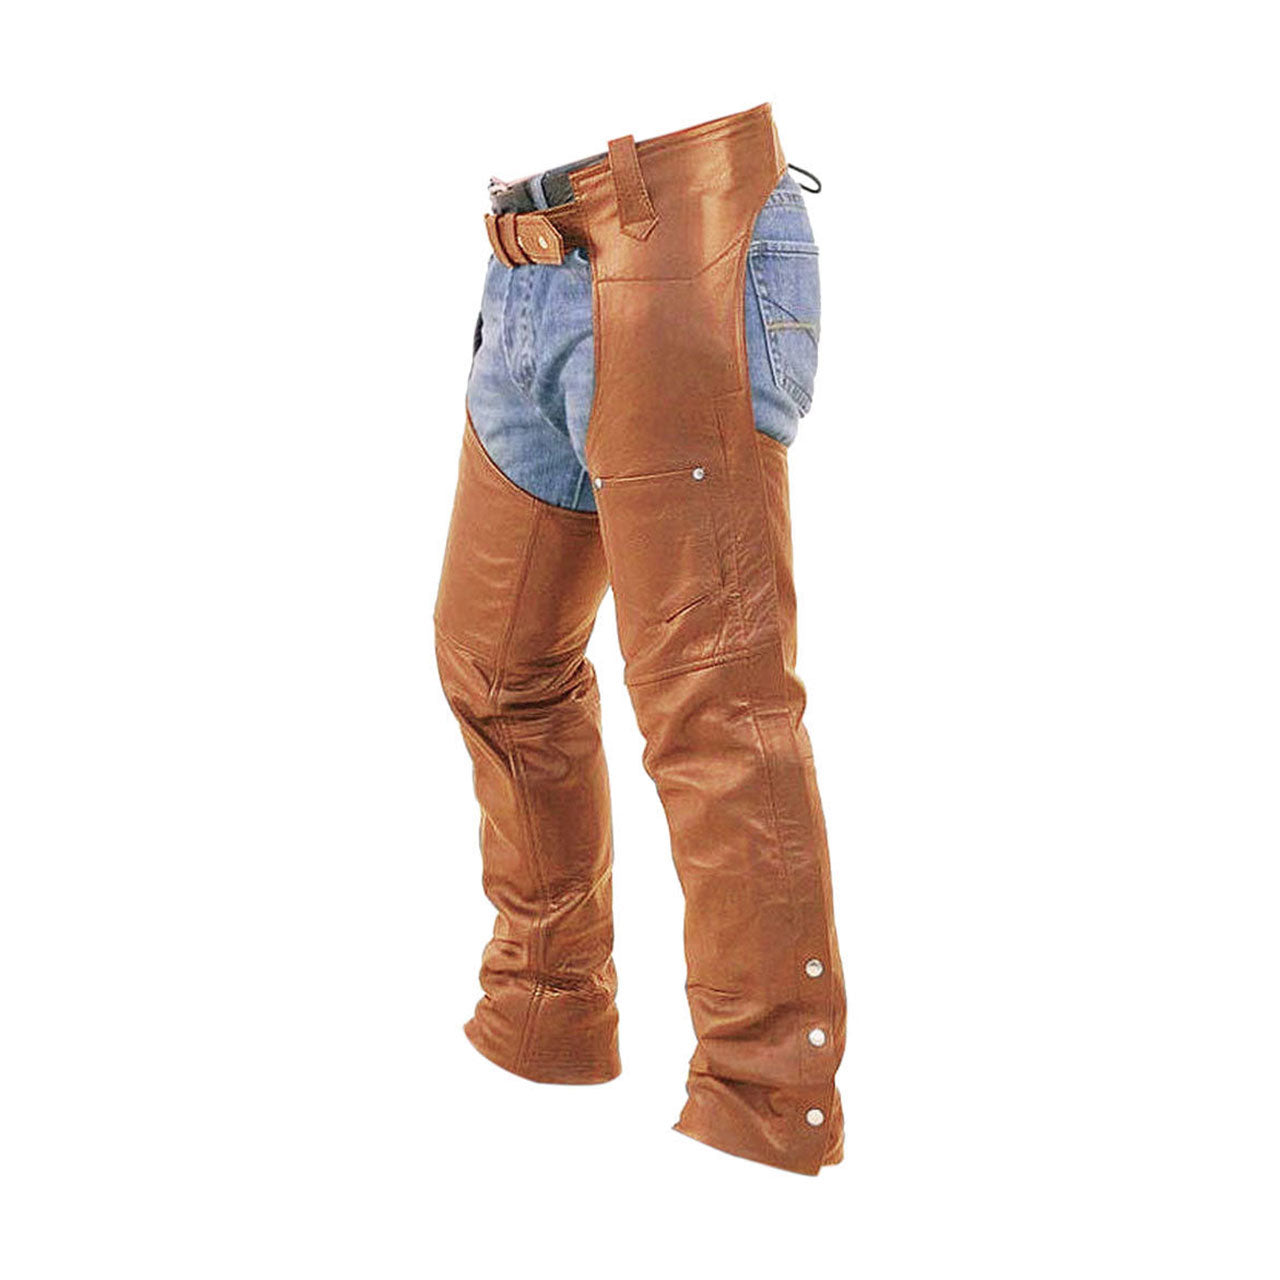 Mens Bikers Chaps Jeans Brown Leather Motorcycle Style Trouser Pants - (CHAPS-BRW)